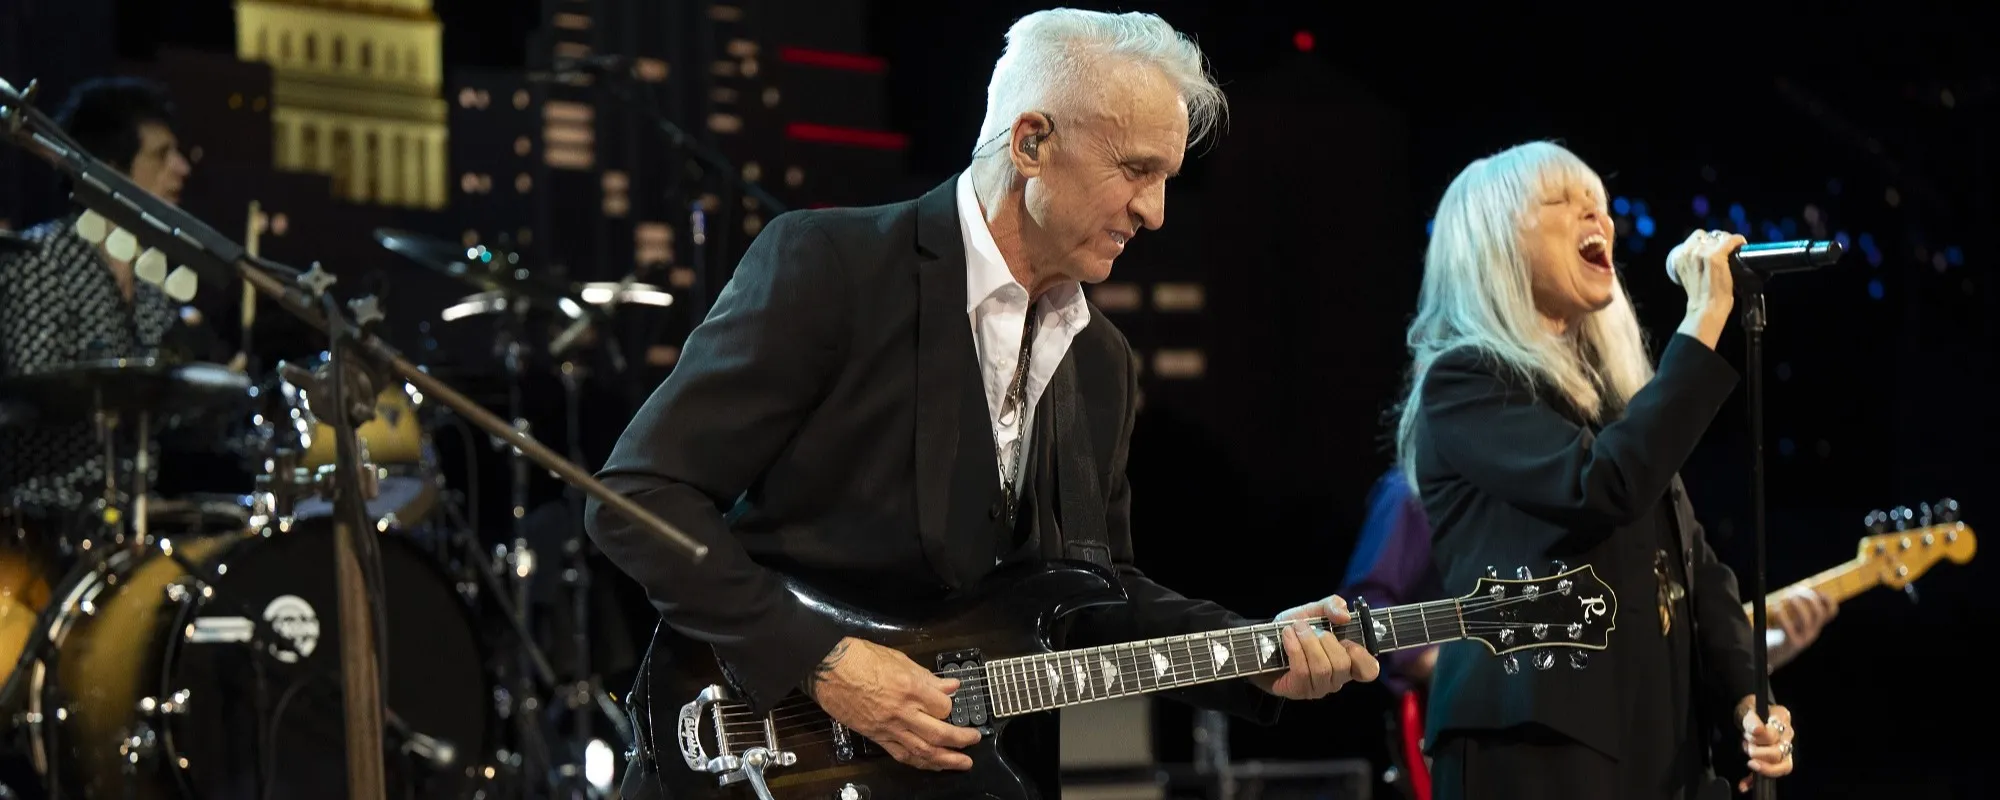 Pat Benatar and Neil Giraldo Featured on New ‘Austin City Limits’ Episode: How to Watch